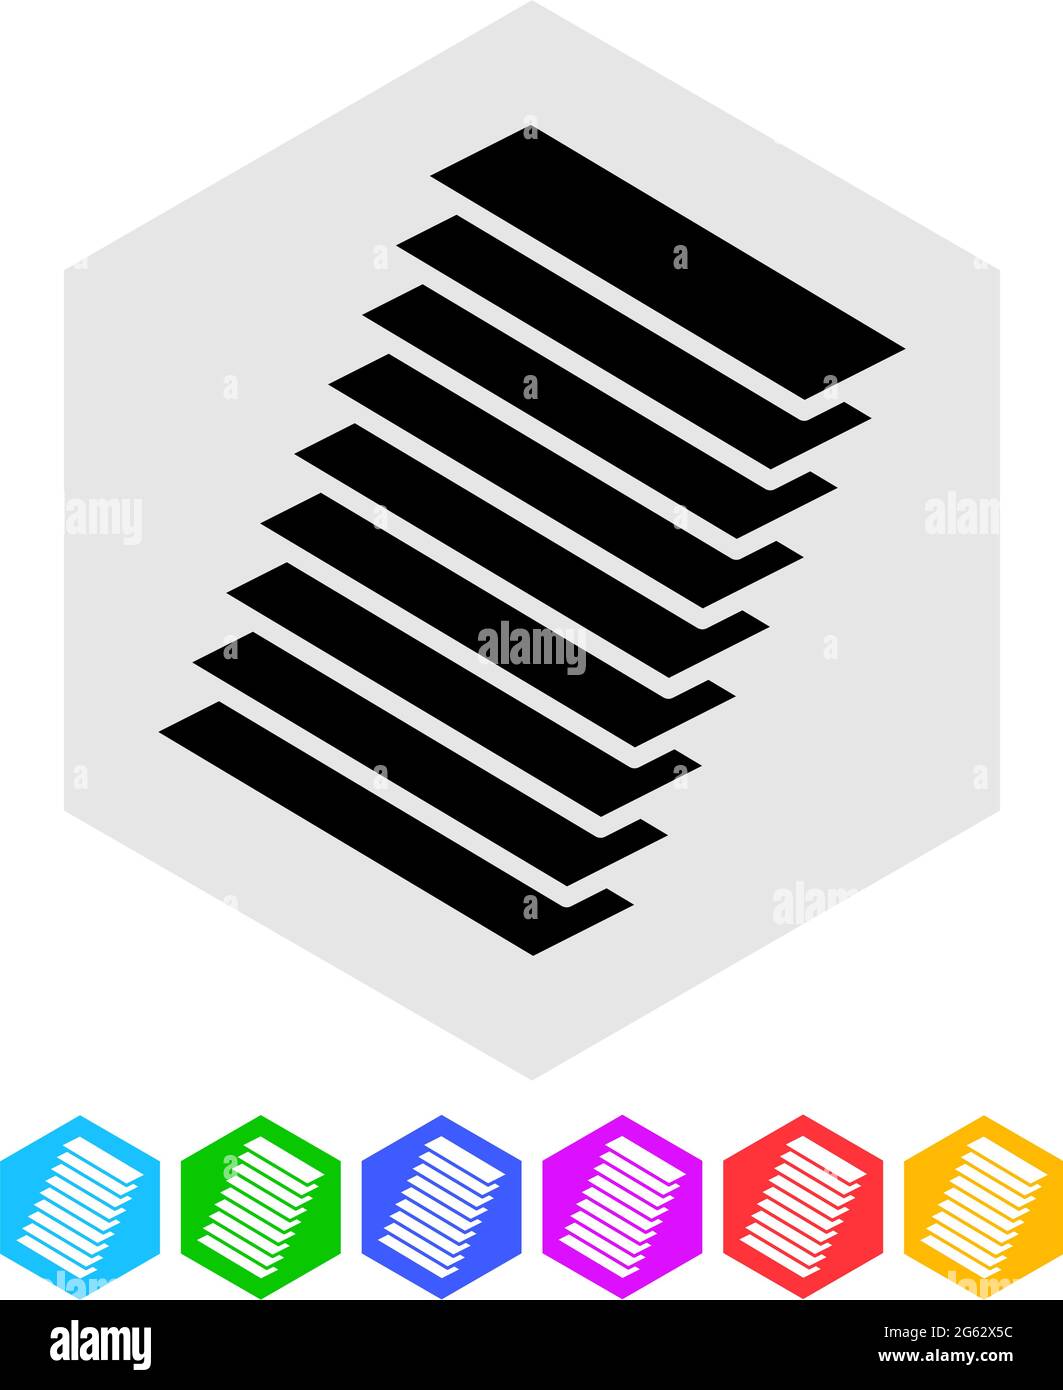 Stair, staircase isometric icon, symbol – stock vector illustration, clip-art graphics Stock Vector